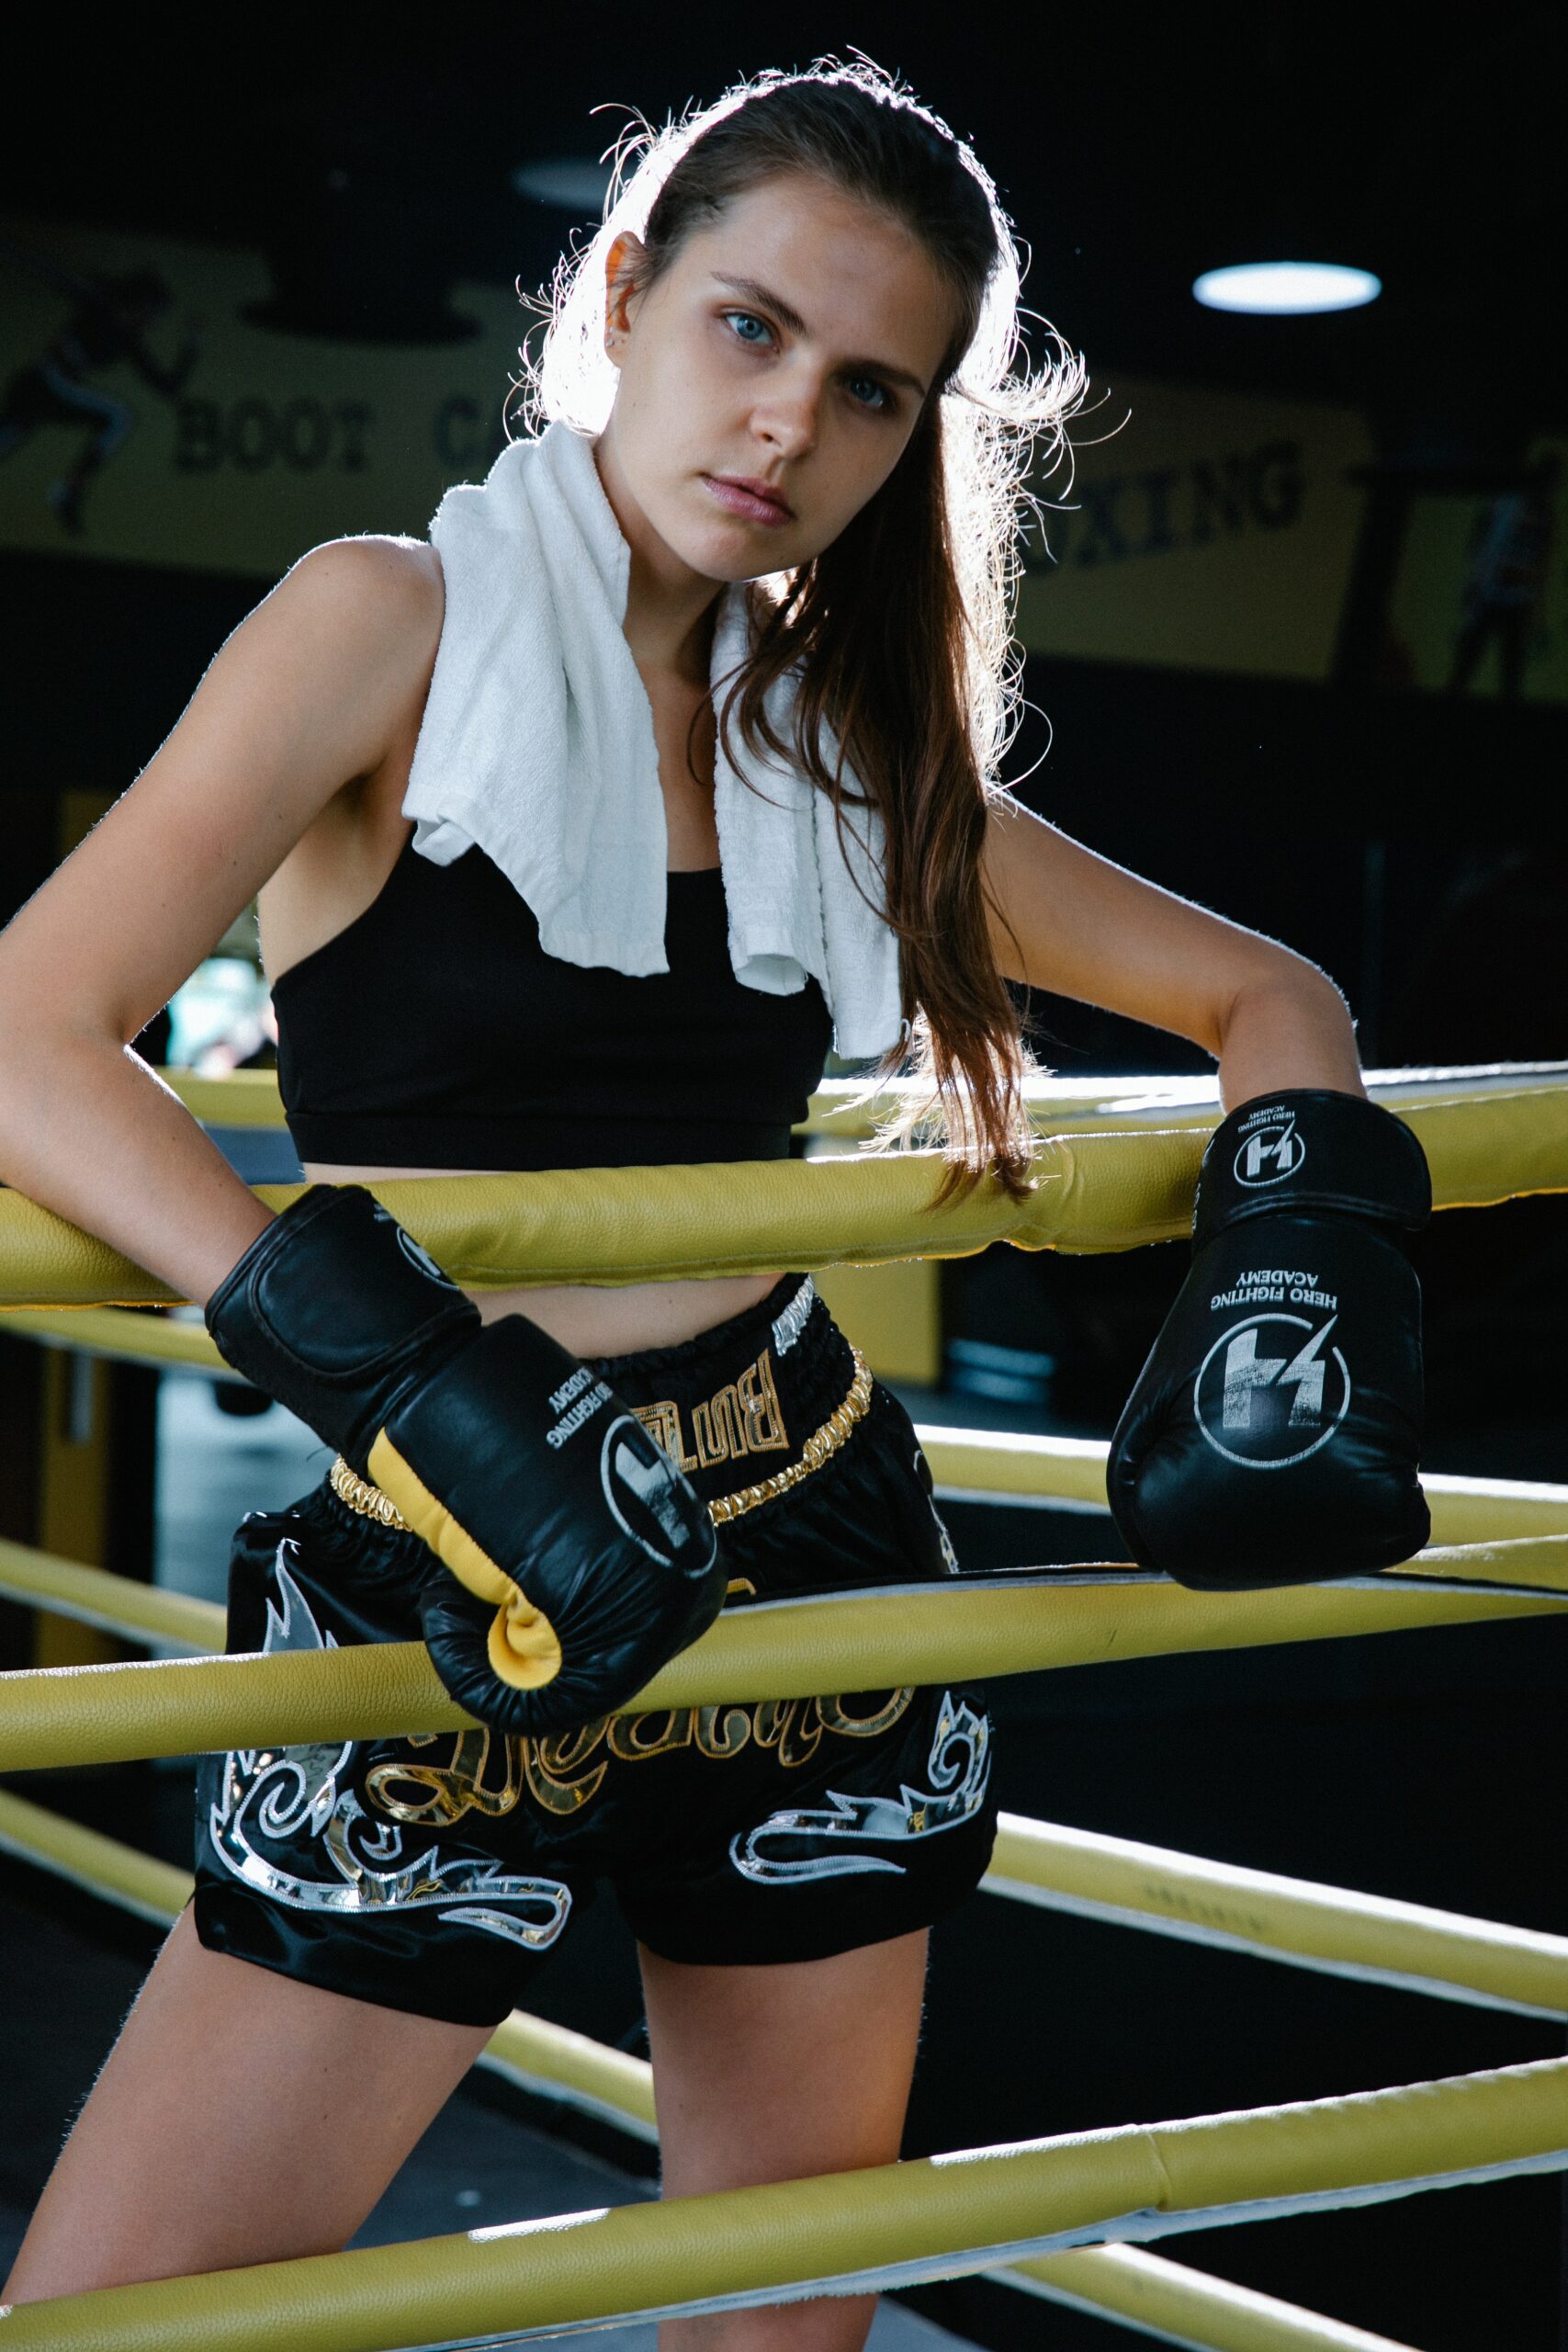 boxer posing in the ring with her boxing shorts